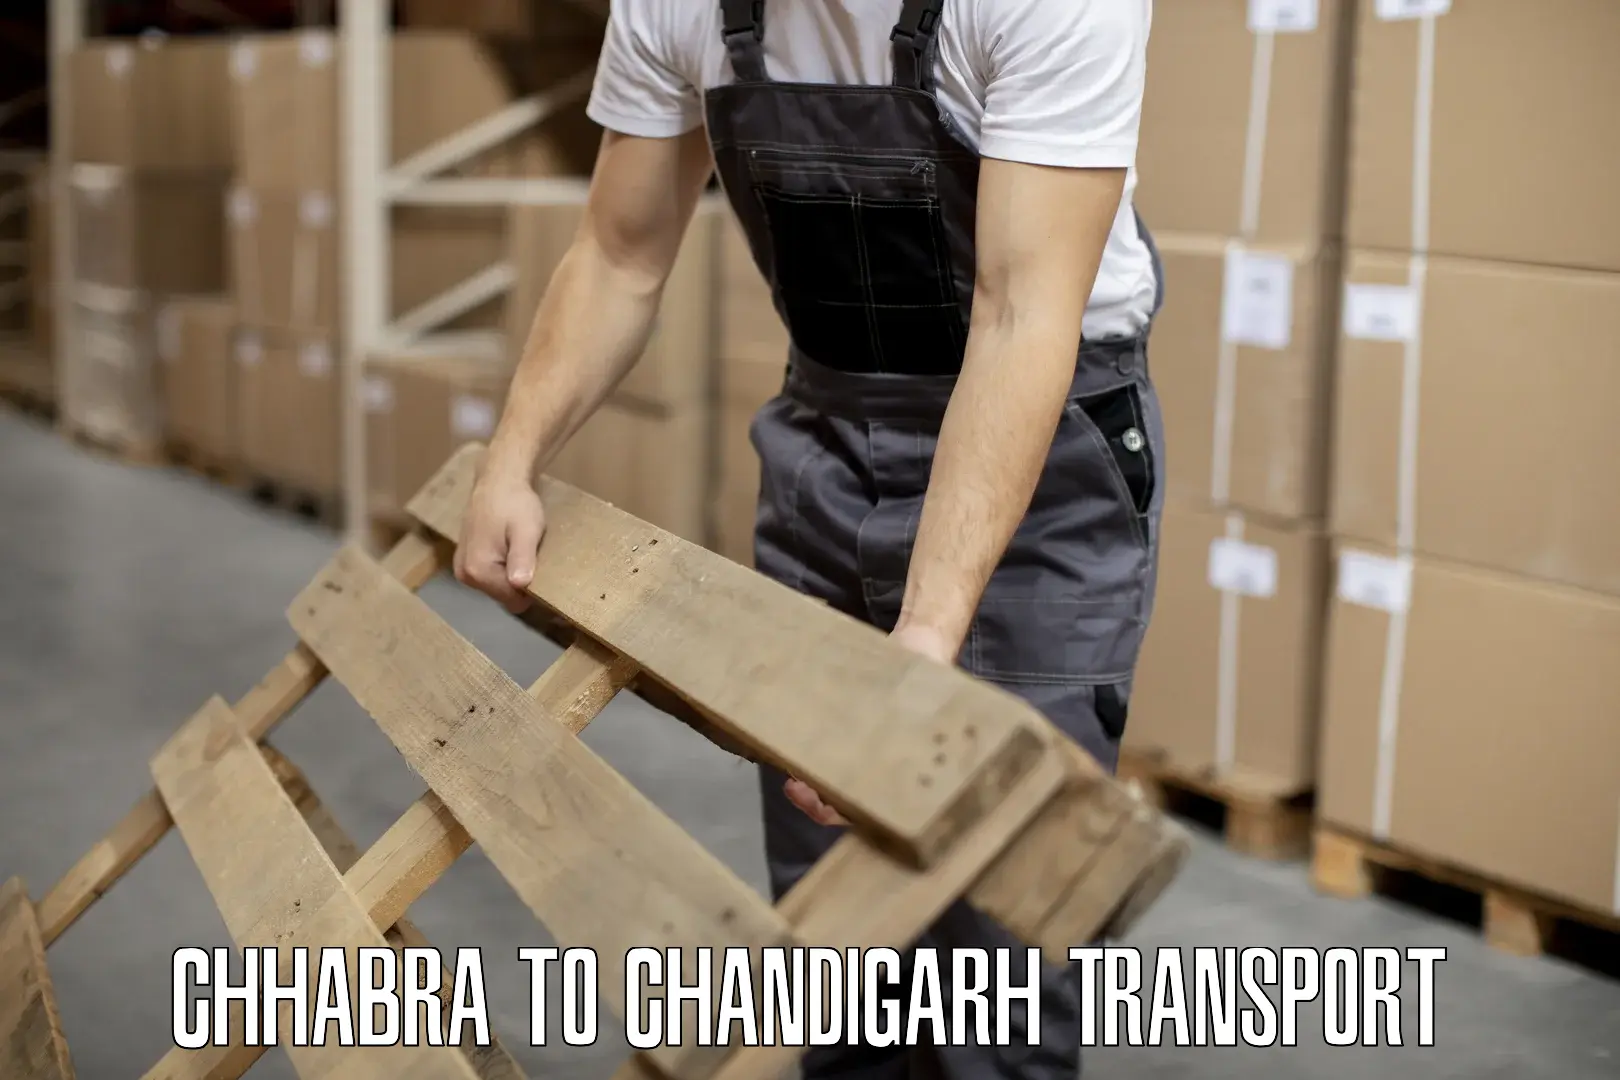 Commercial transport service Chhabra to Chandigarh